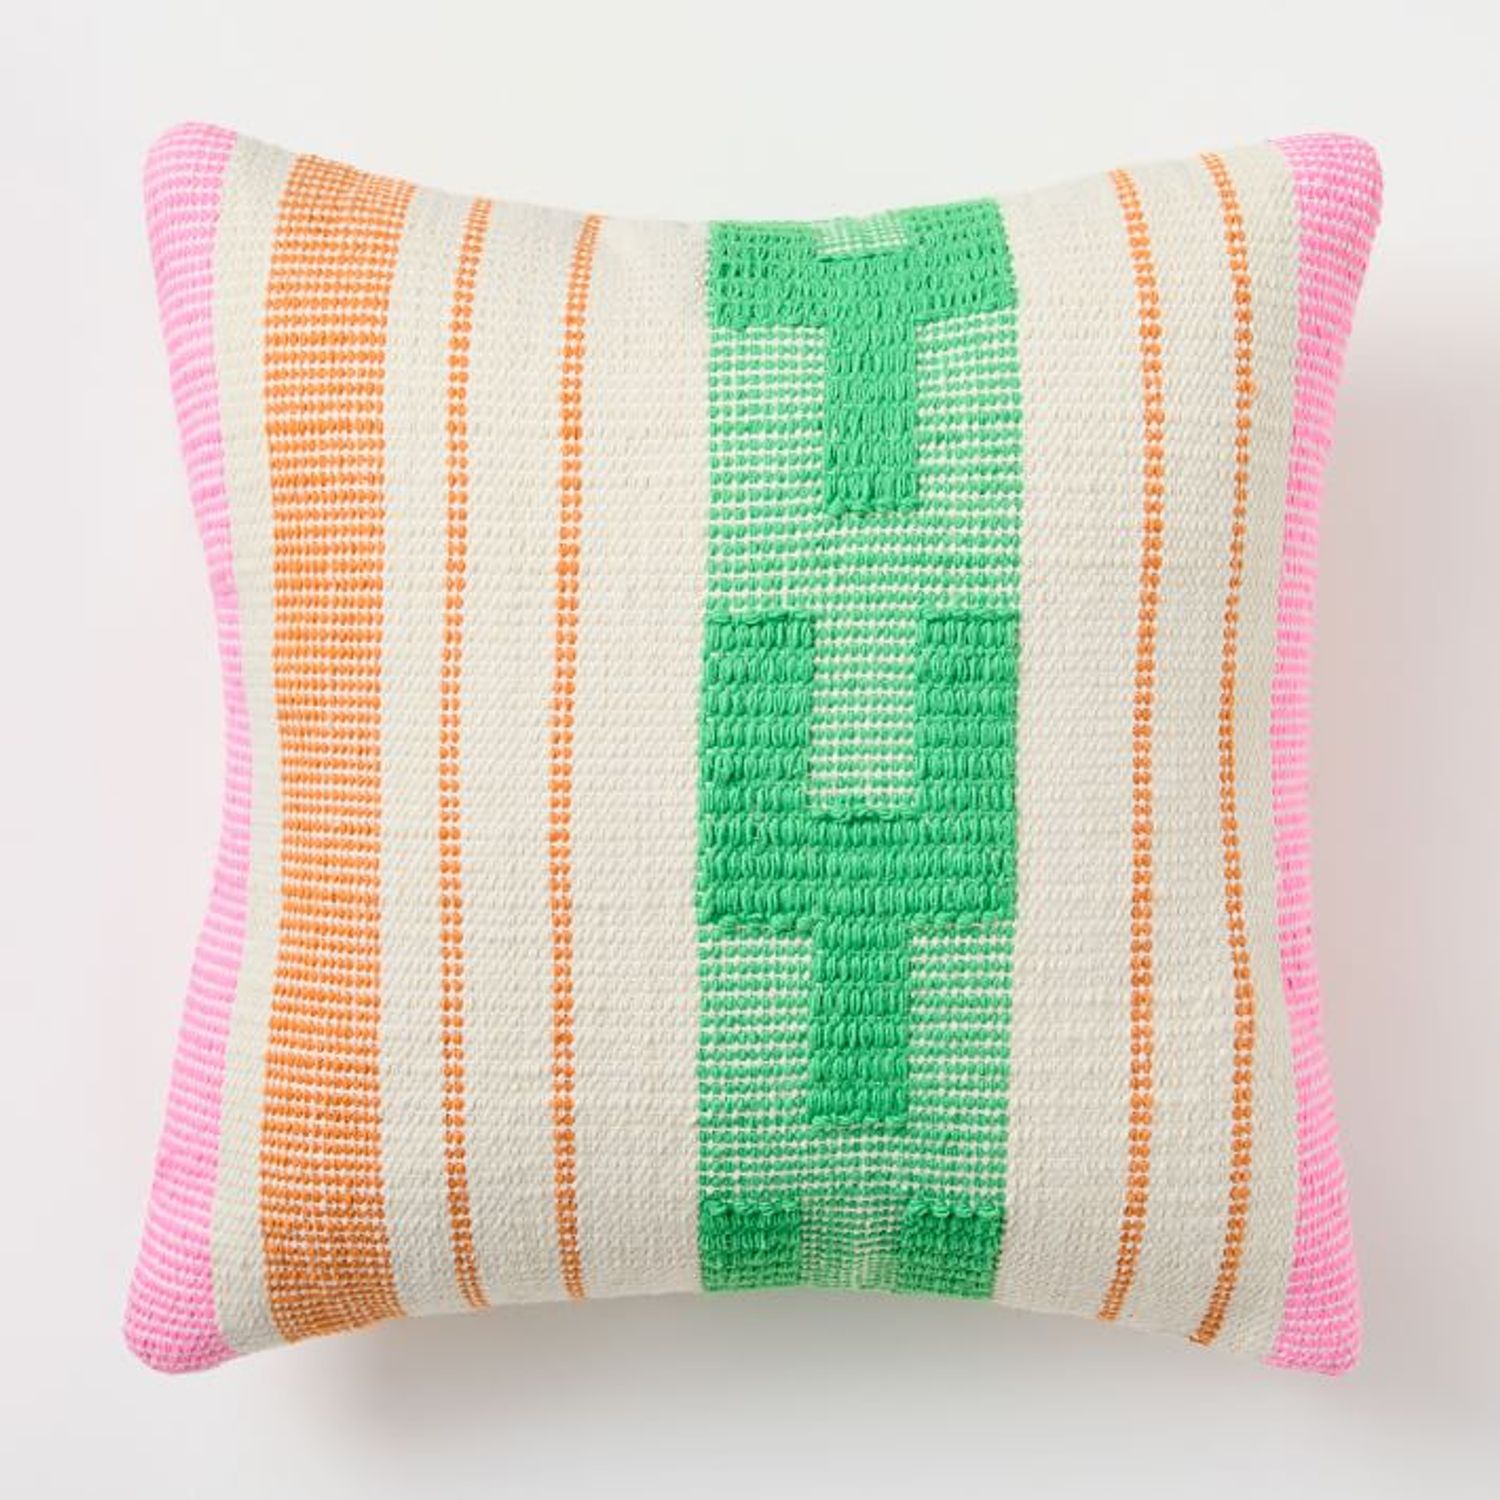 Shop Bolé Road Stripe and Step Indoor/Outdoor Pillow from West Elm on Openhaus